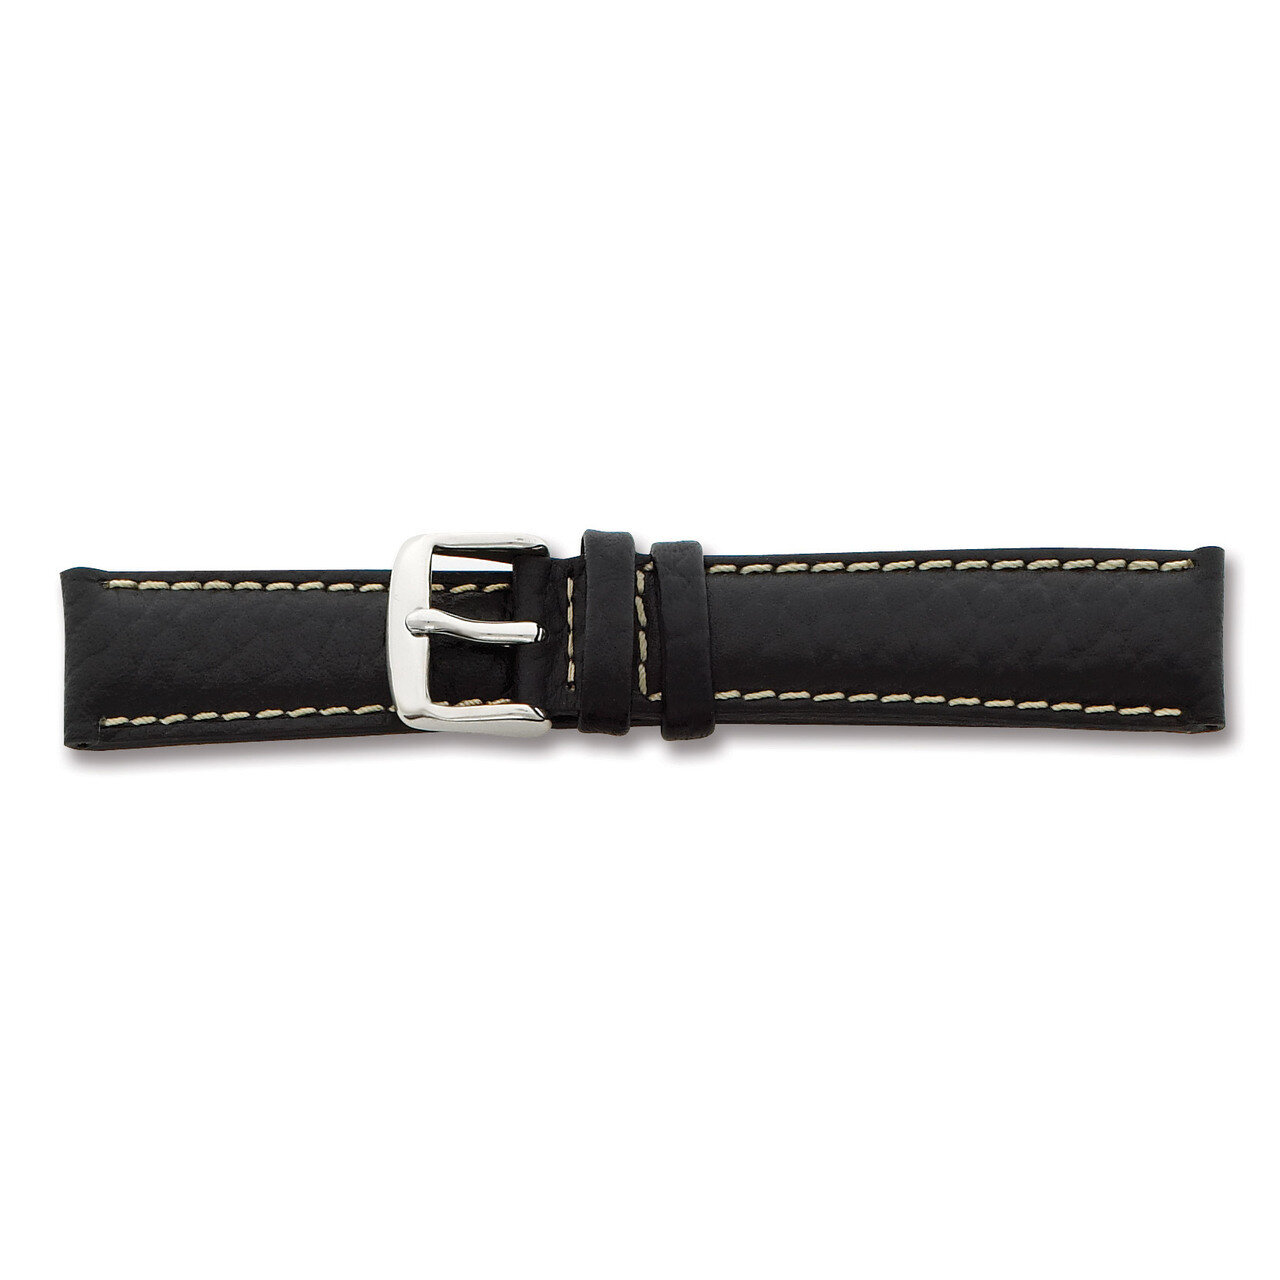 19mm Long Black Leather White Stitch Watch Band 8.5 Inch Silver-tone Buckle BA99L-19